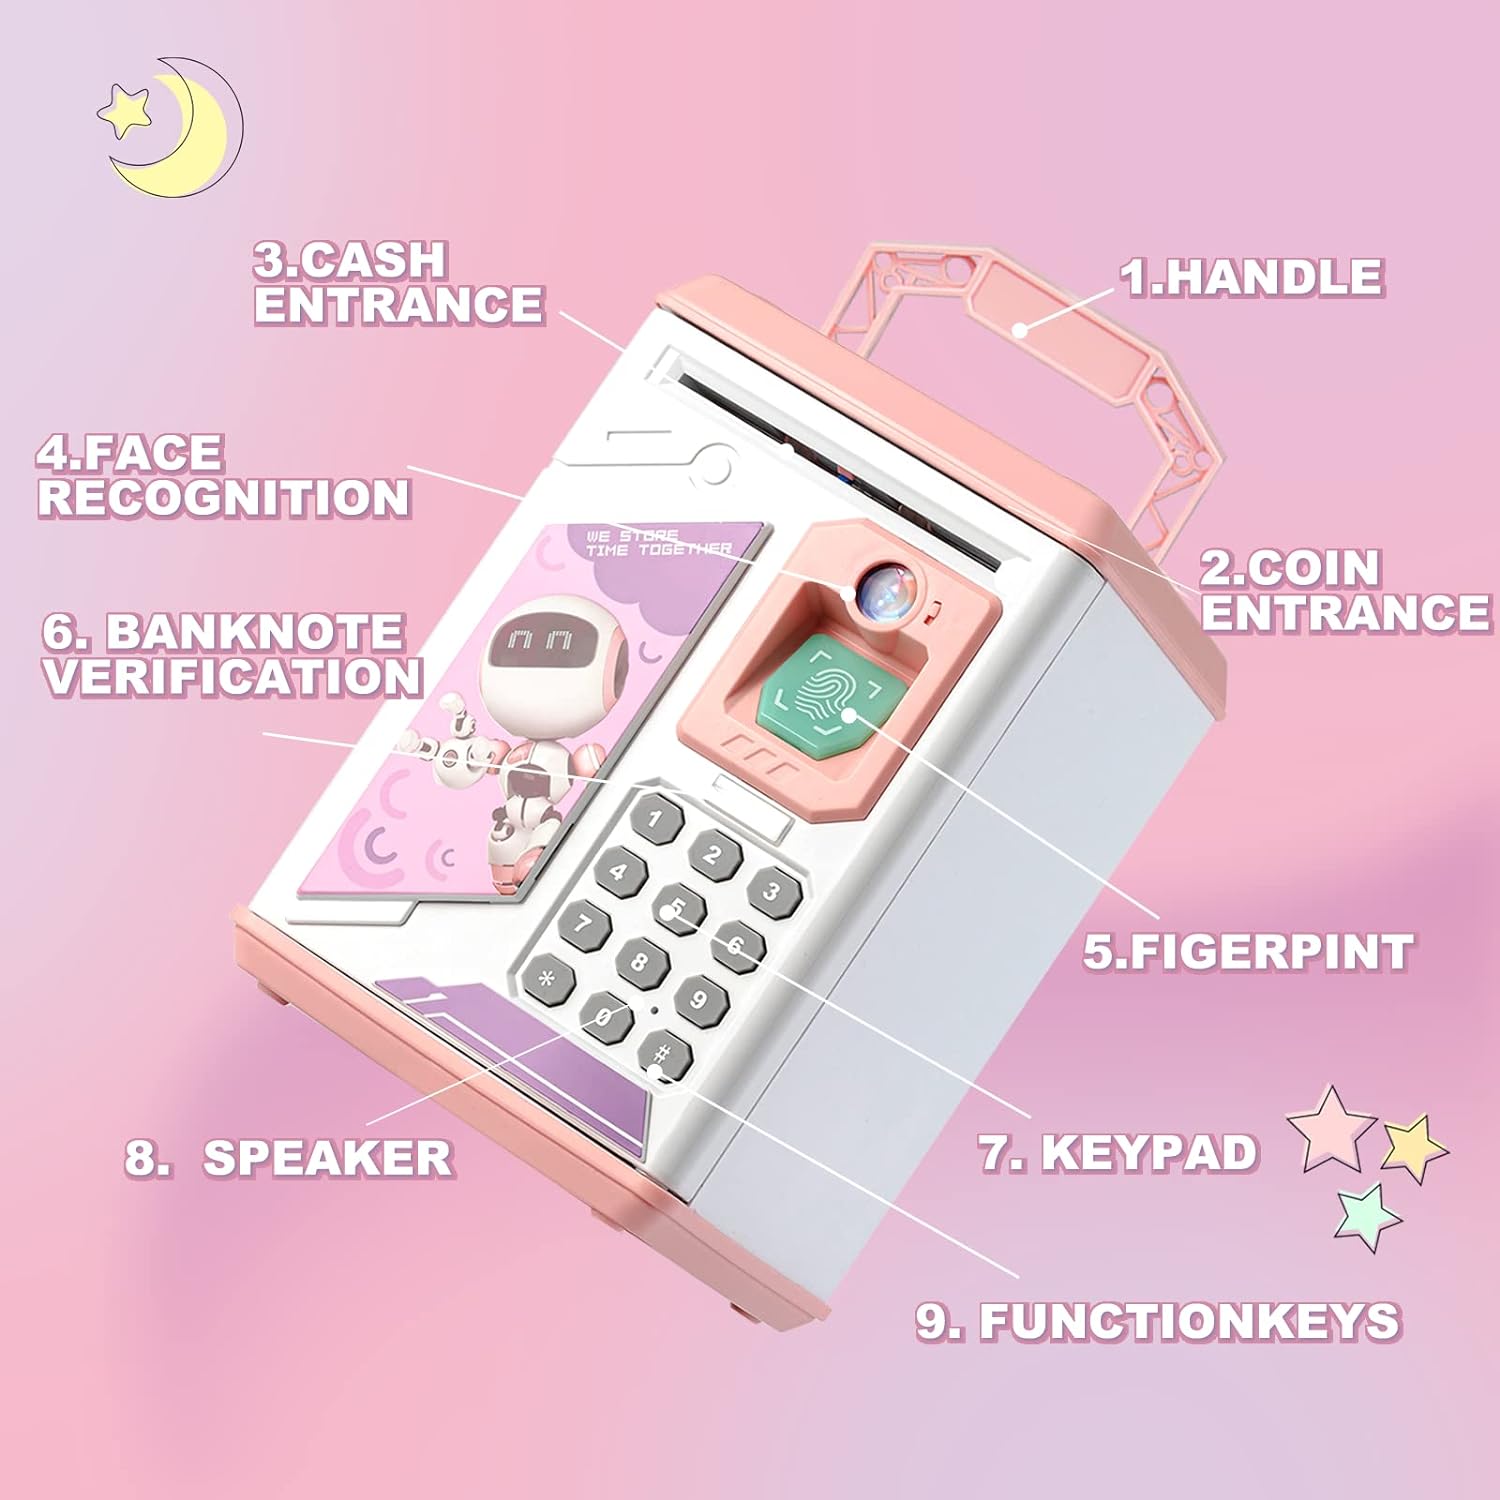 Kids Piggy Bank, Electronic Bank Toy, Auto Scroll Paper Money ATM, with Personal Password & Fingerprint Unlocking Coin Bank ,Perfect Birthday Toys Gifts for Boys Girls (Pink)